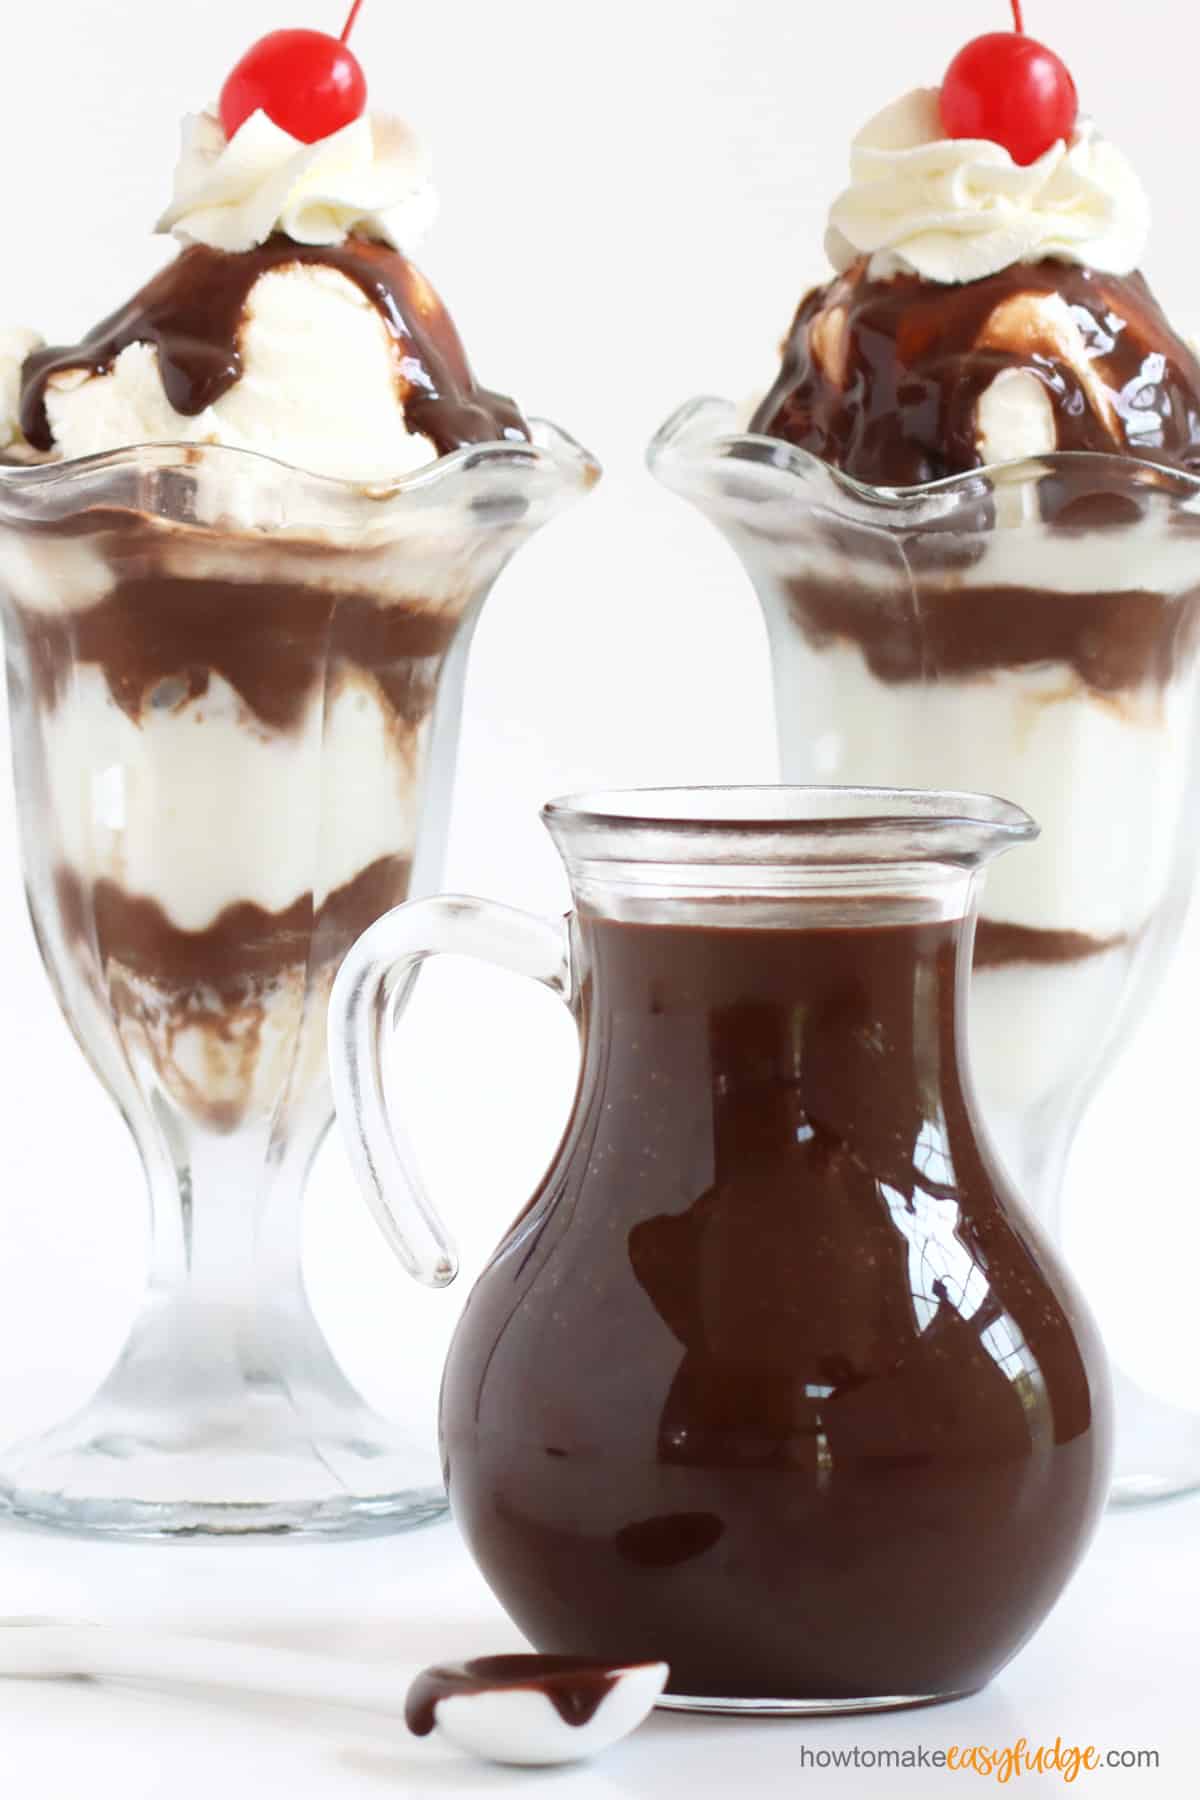 Easy hot fudge sauce in a glass pitcher in front of two hot fudge sundaes with whipped cream and cherries on top.